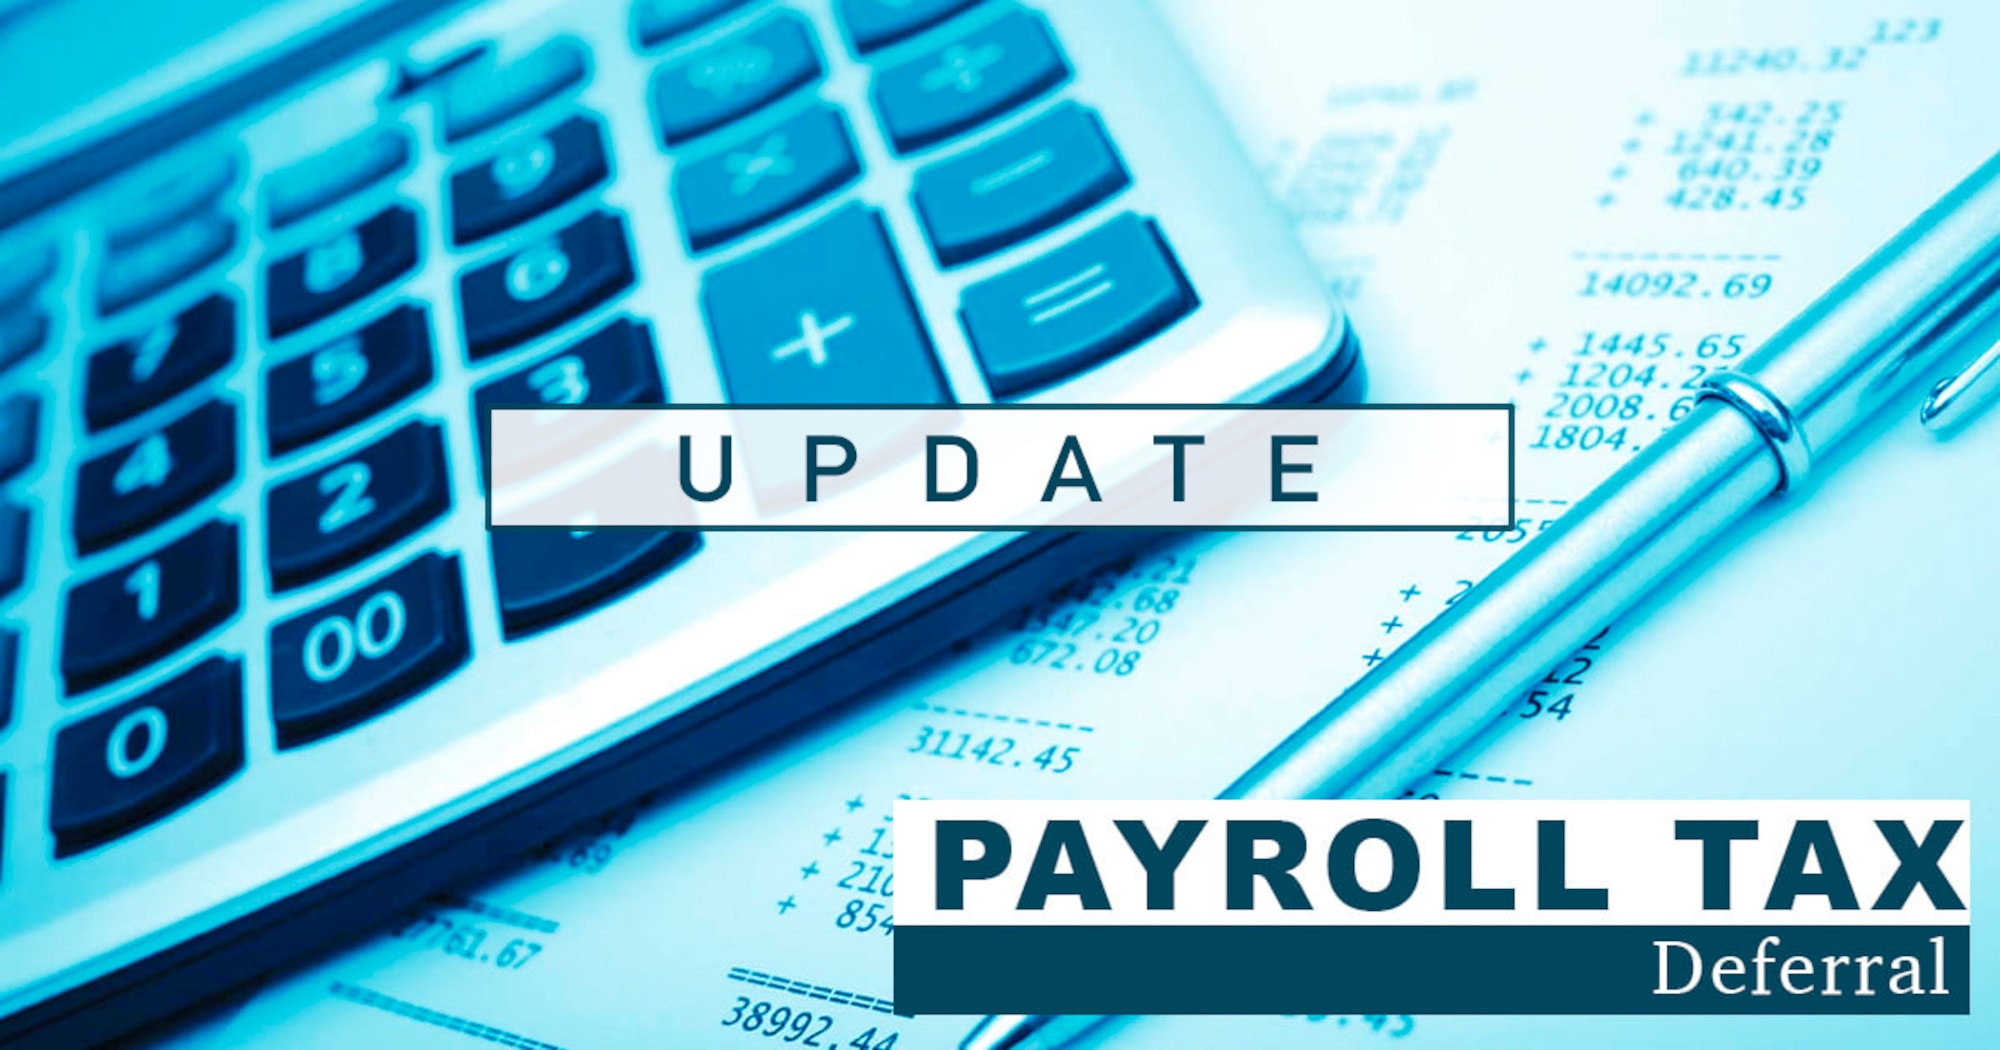 A graphic depicting an "update" to the payroll tax deferral.